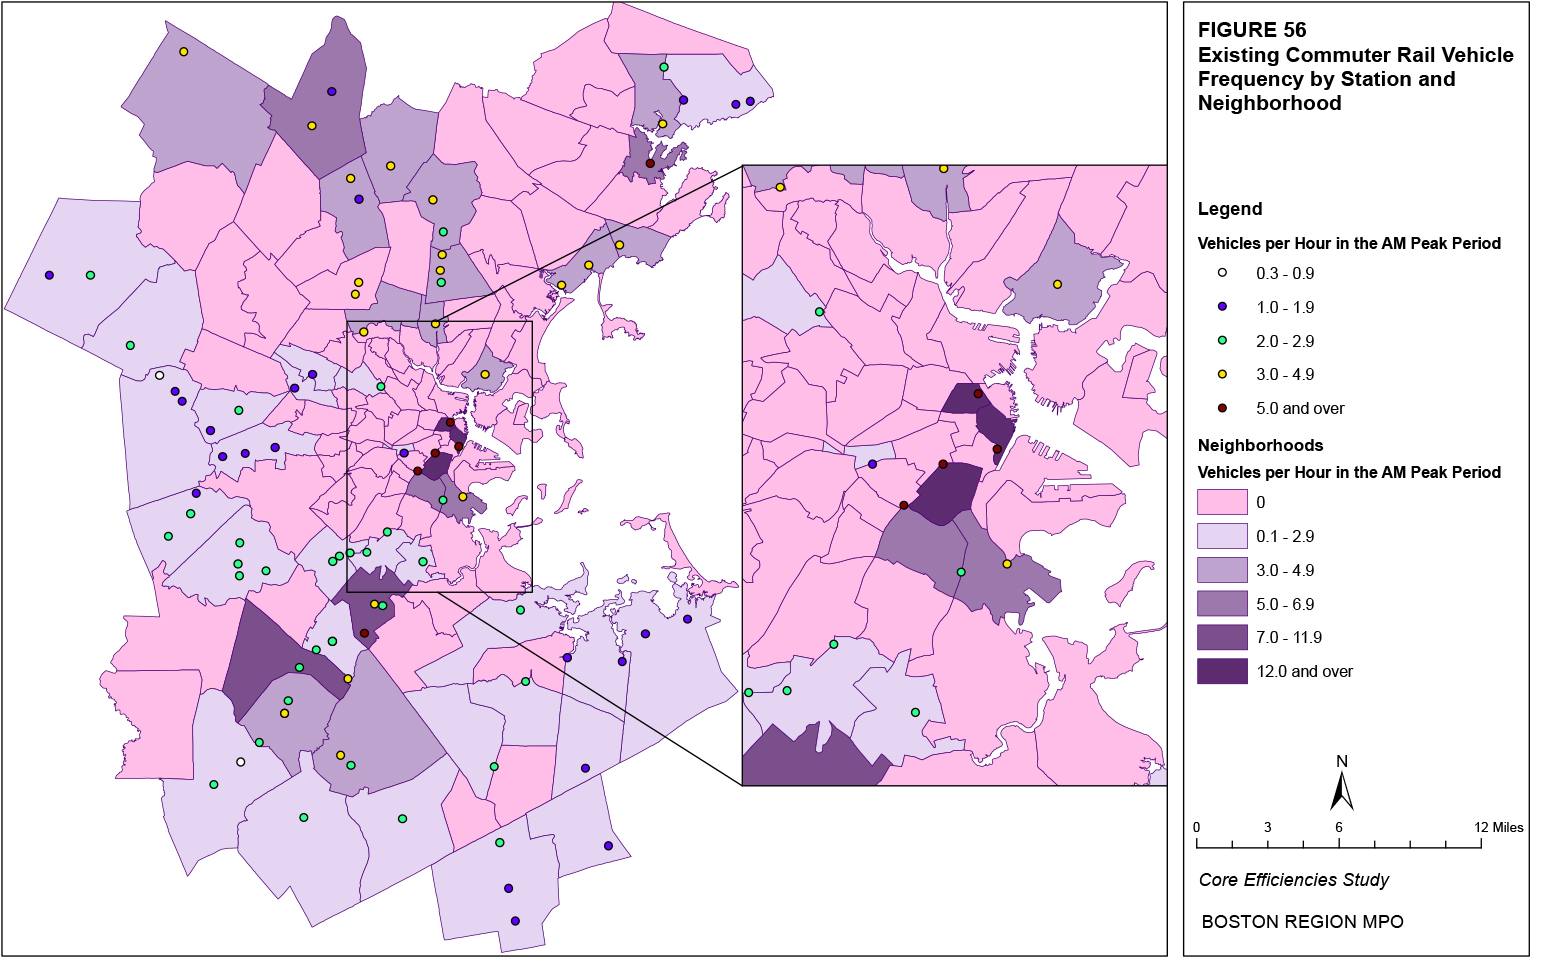 This map shows the existing AM peak commuter rail frequency (vehicles per hour) by station and neighborhood.